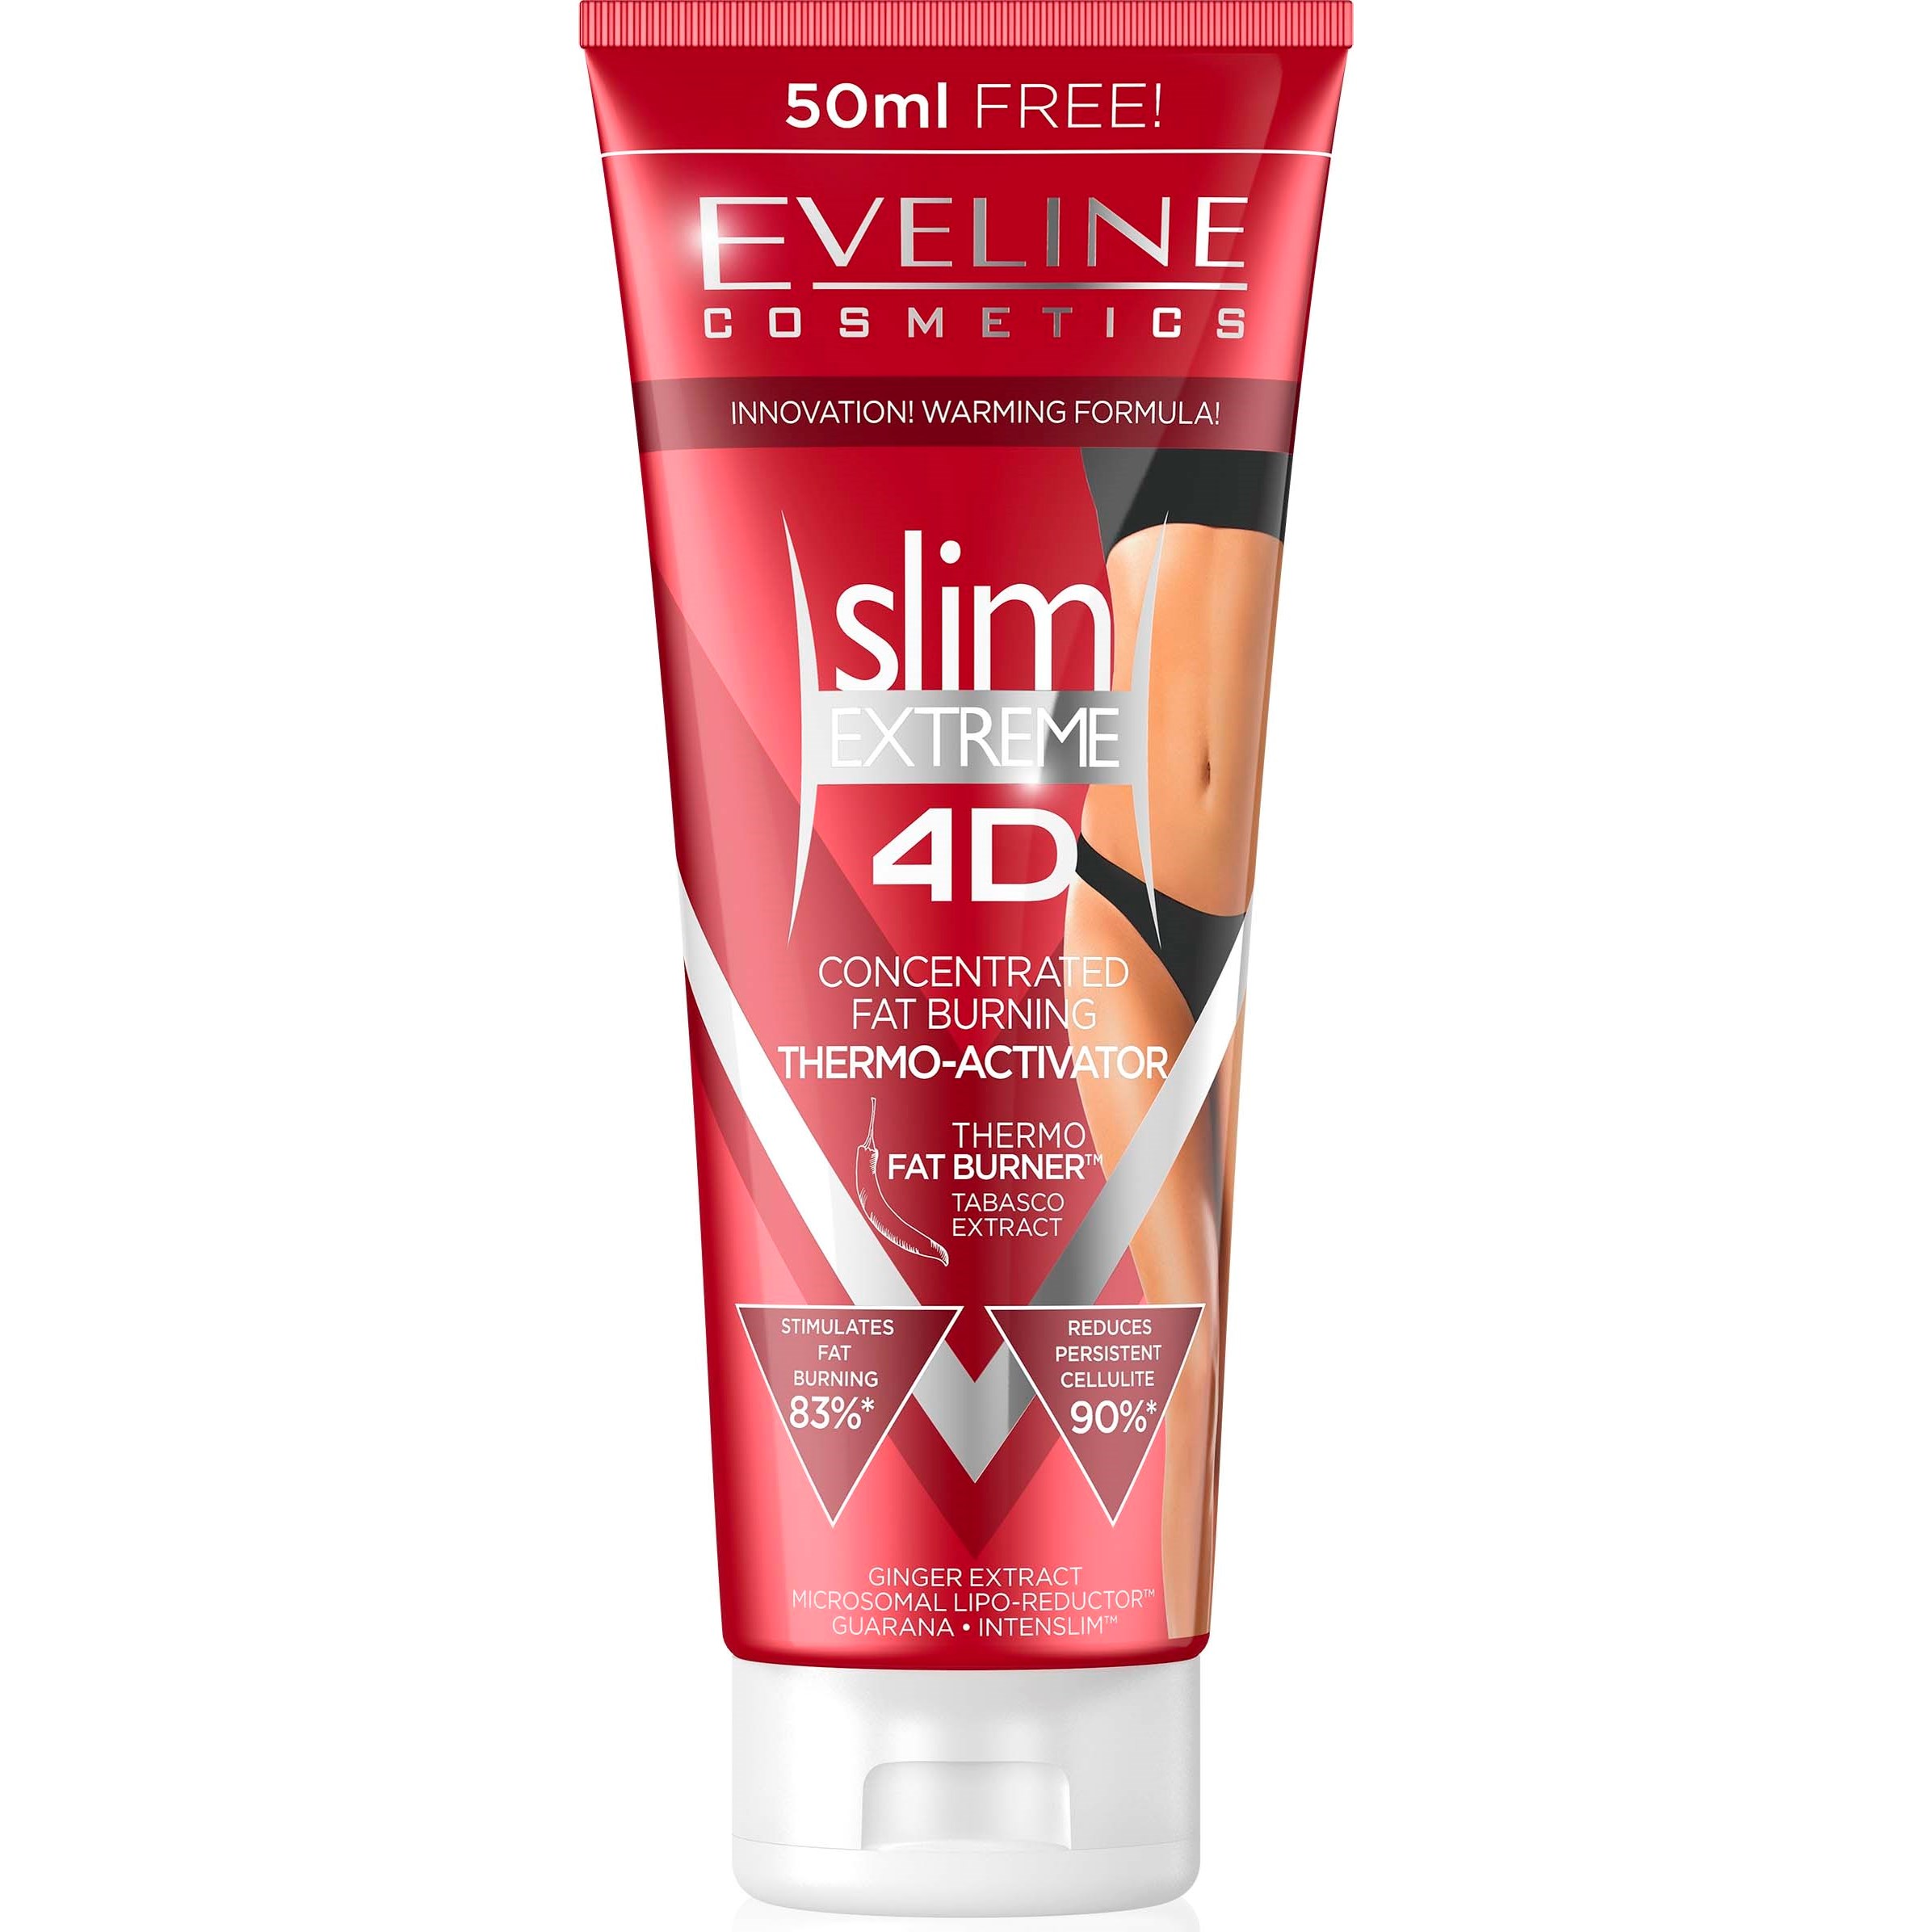 Läs mer om Eveline Cosmetics Slim Extreme 4d Concentrated Fat Burning Thermo-Acti